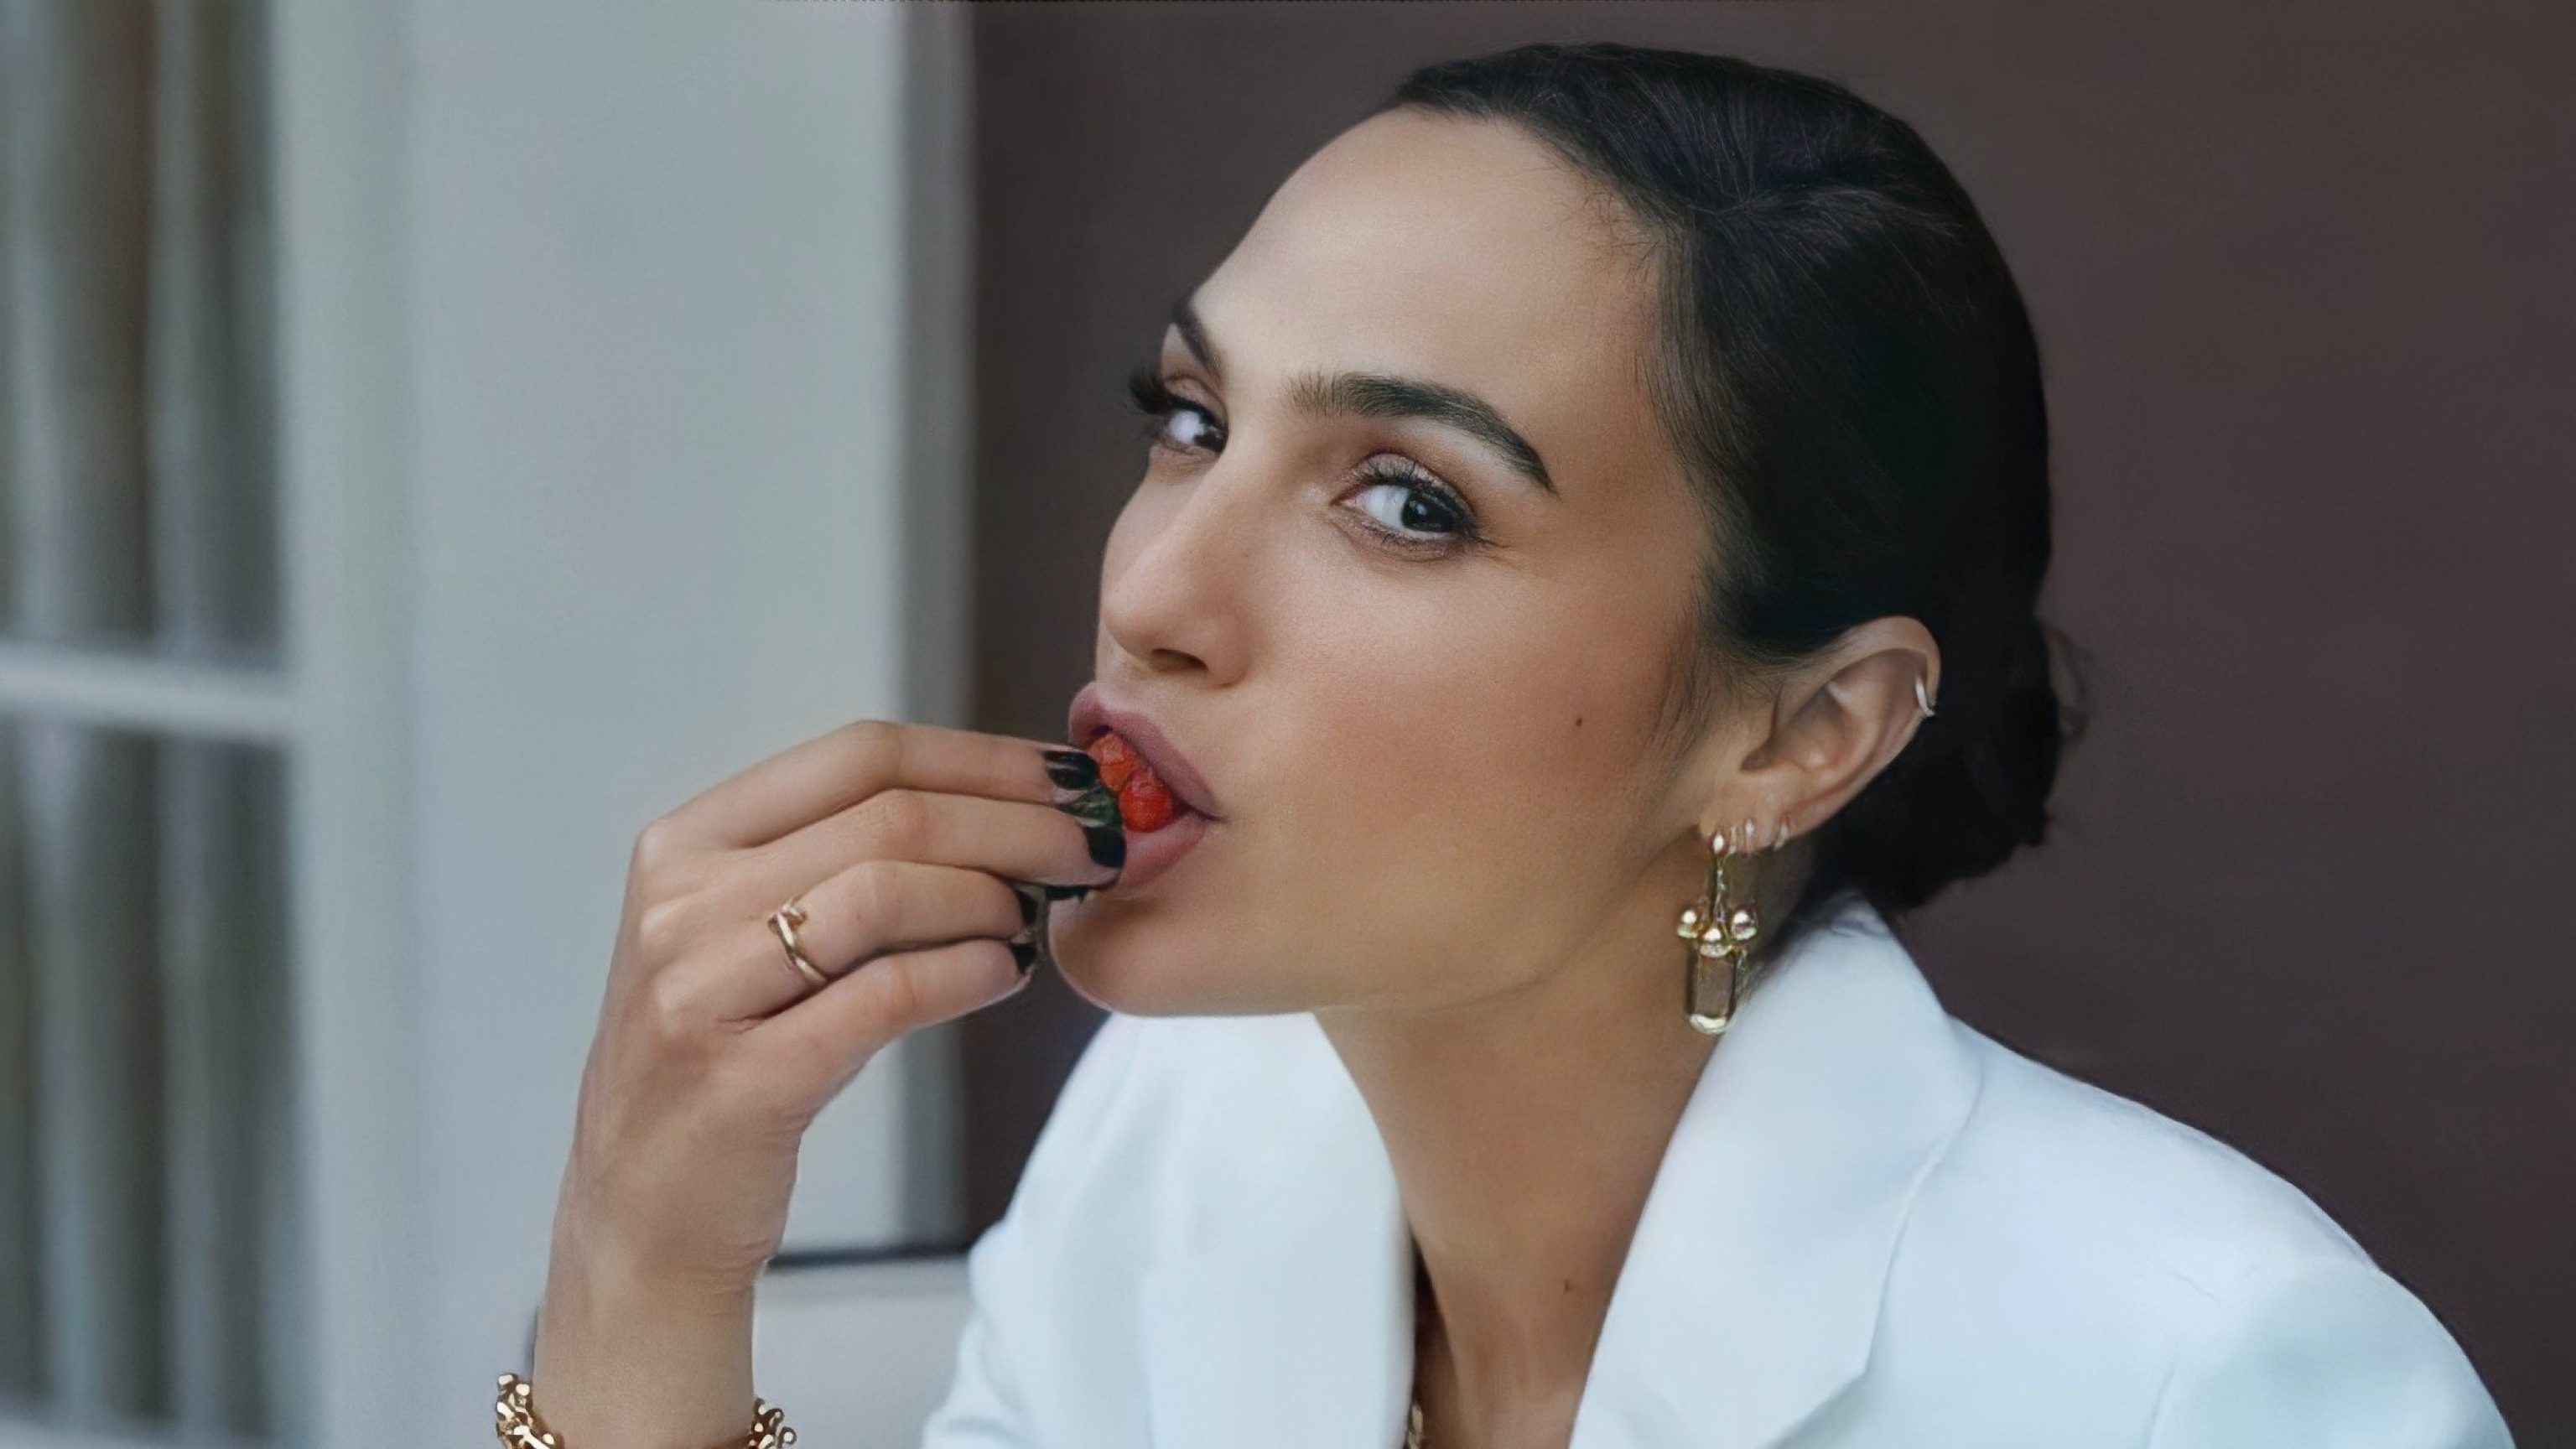 3072x1728 Resolution Gal Gadot eating Strawberry and Cake 3072x1728 ...